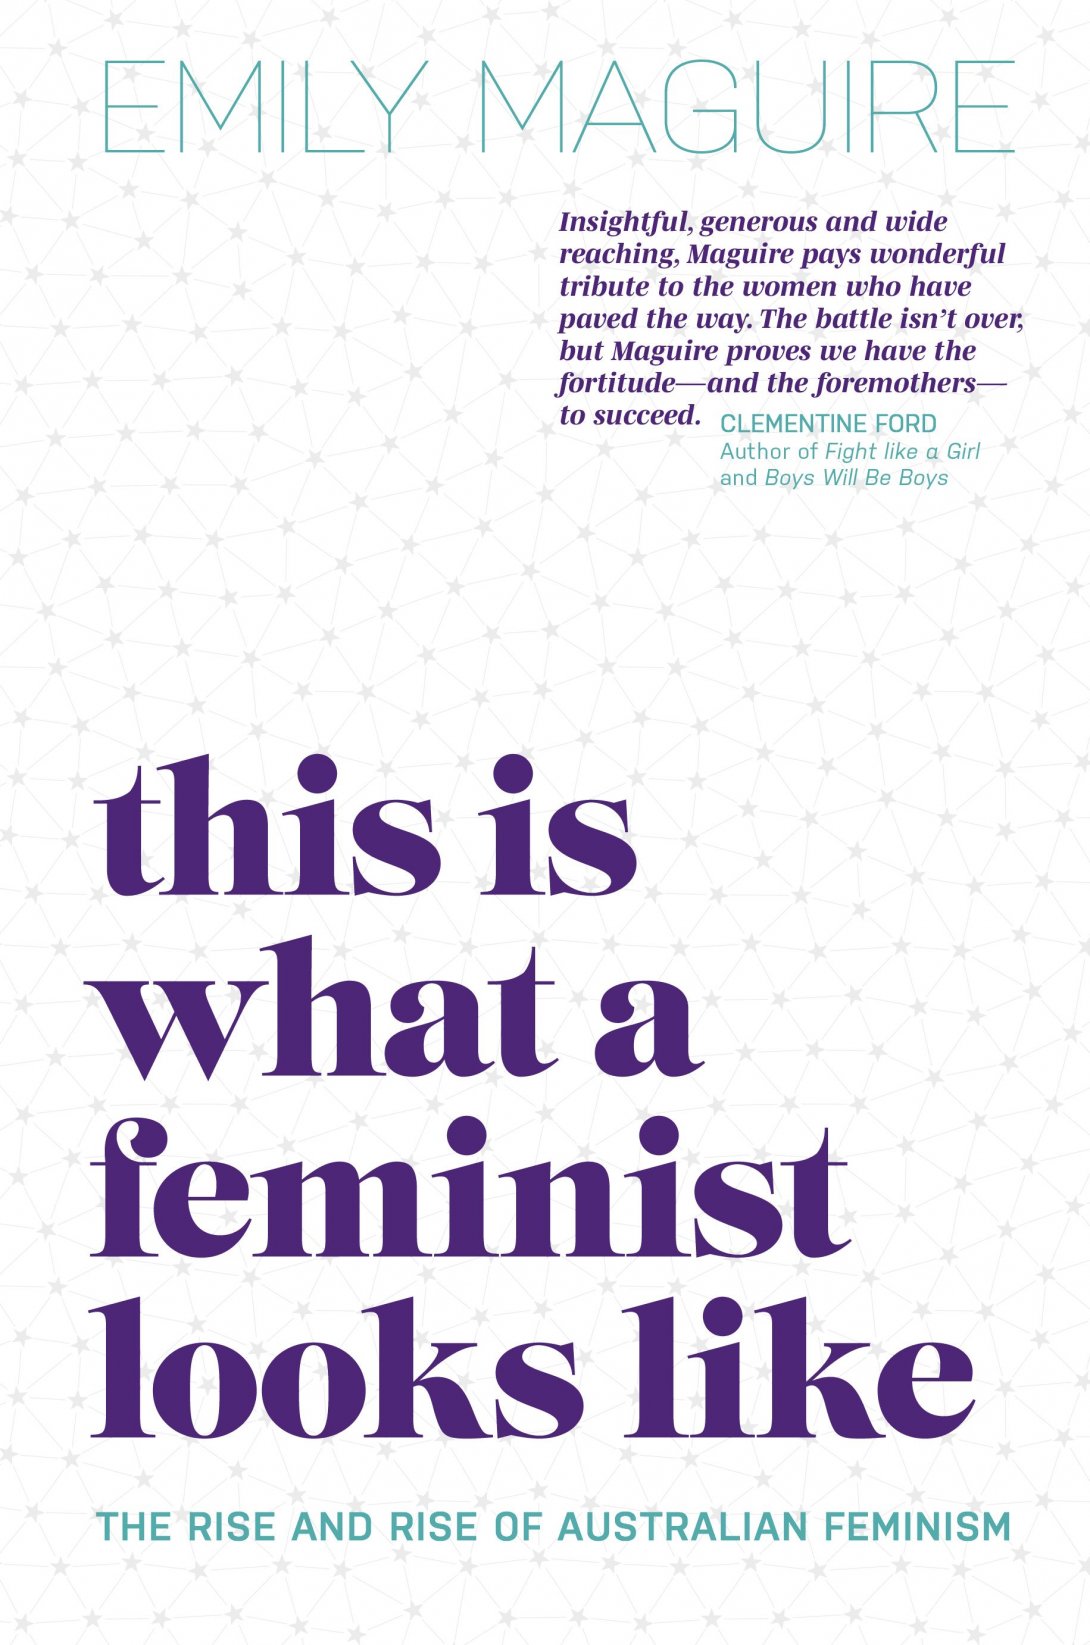 This is What a Feminist Looks Like book cover. White background and purple or green text on top.